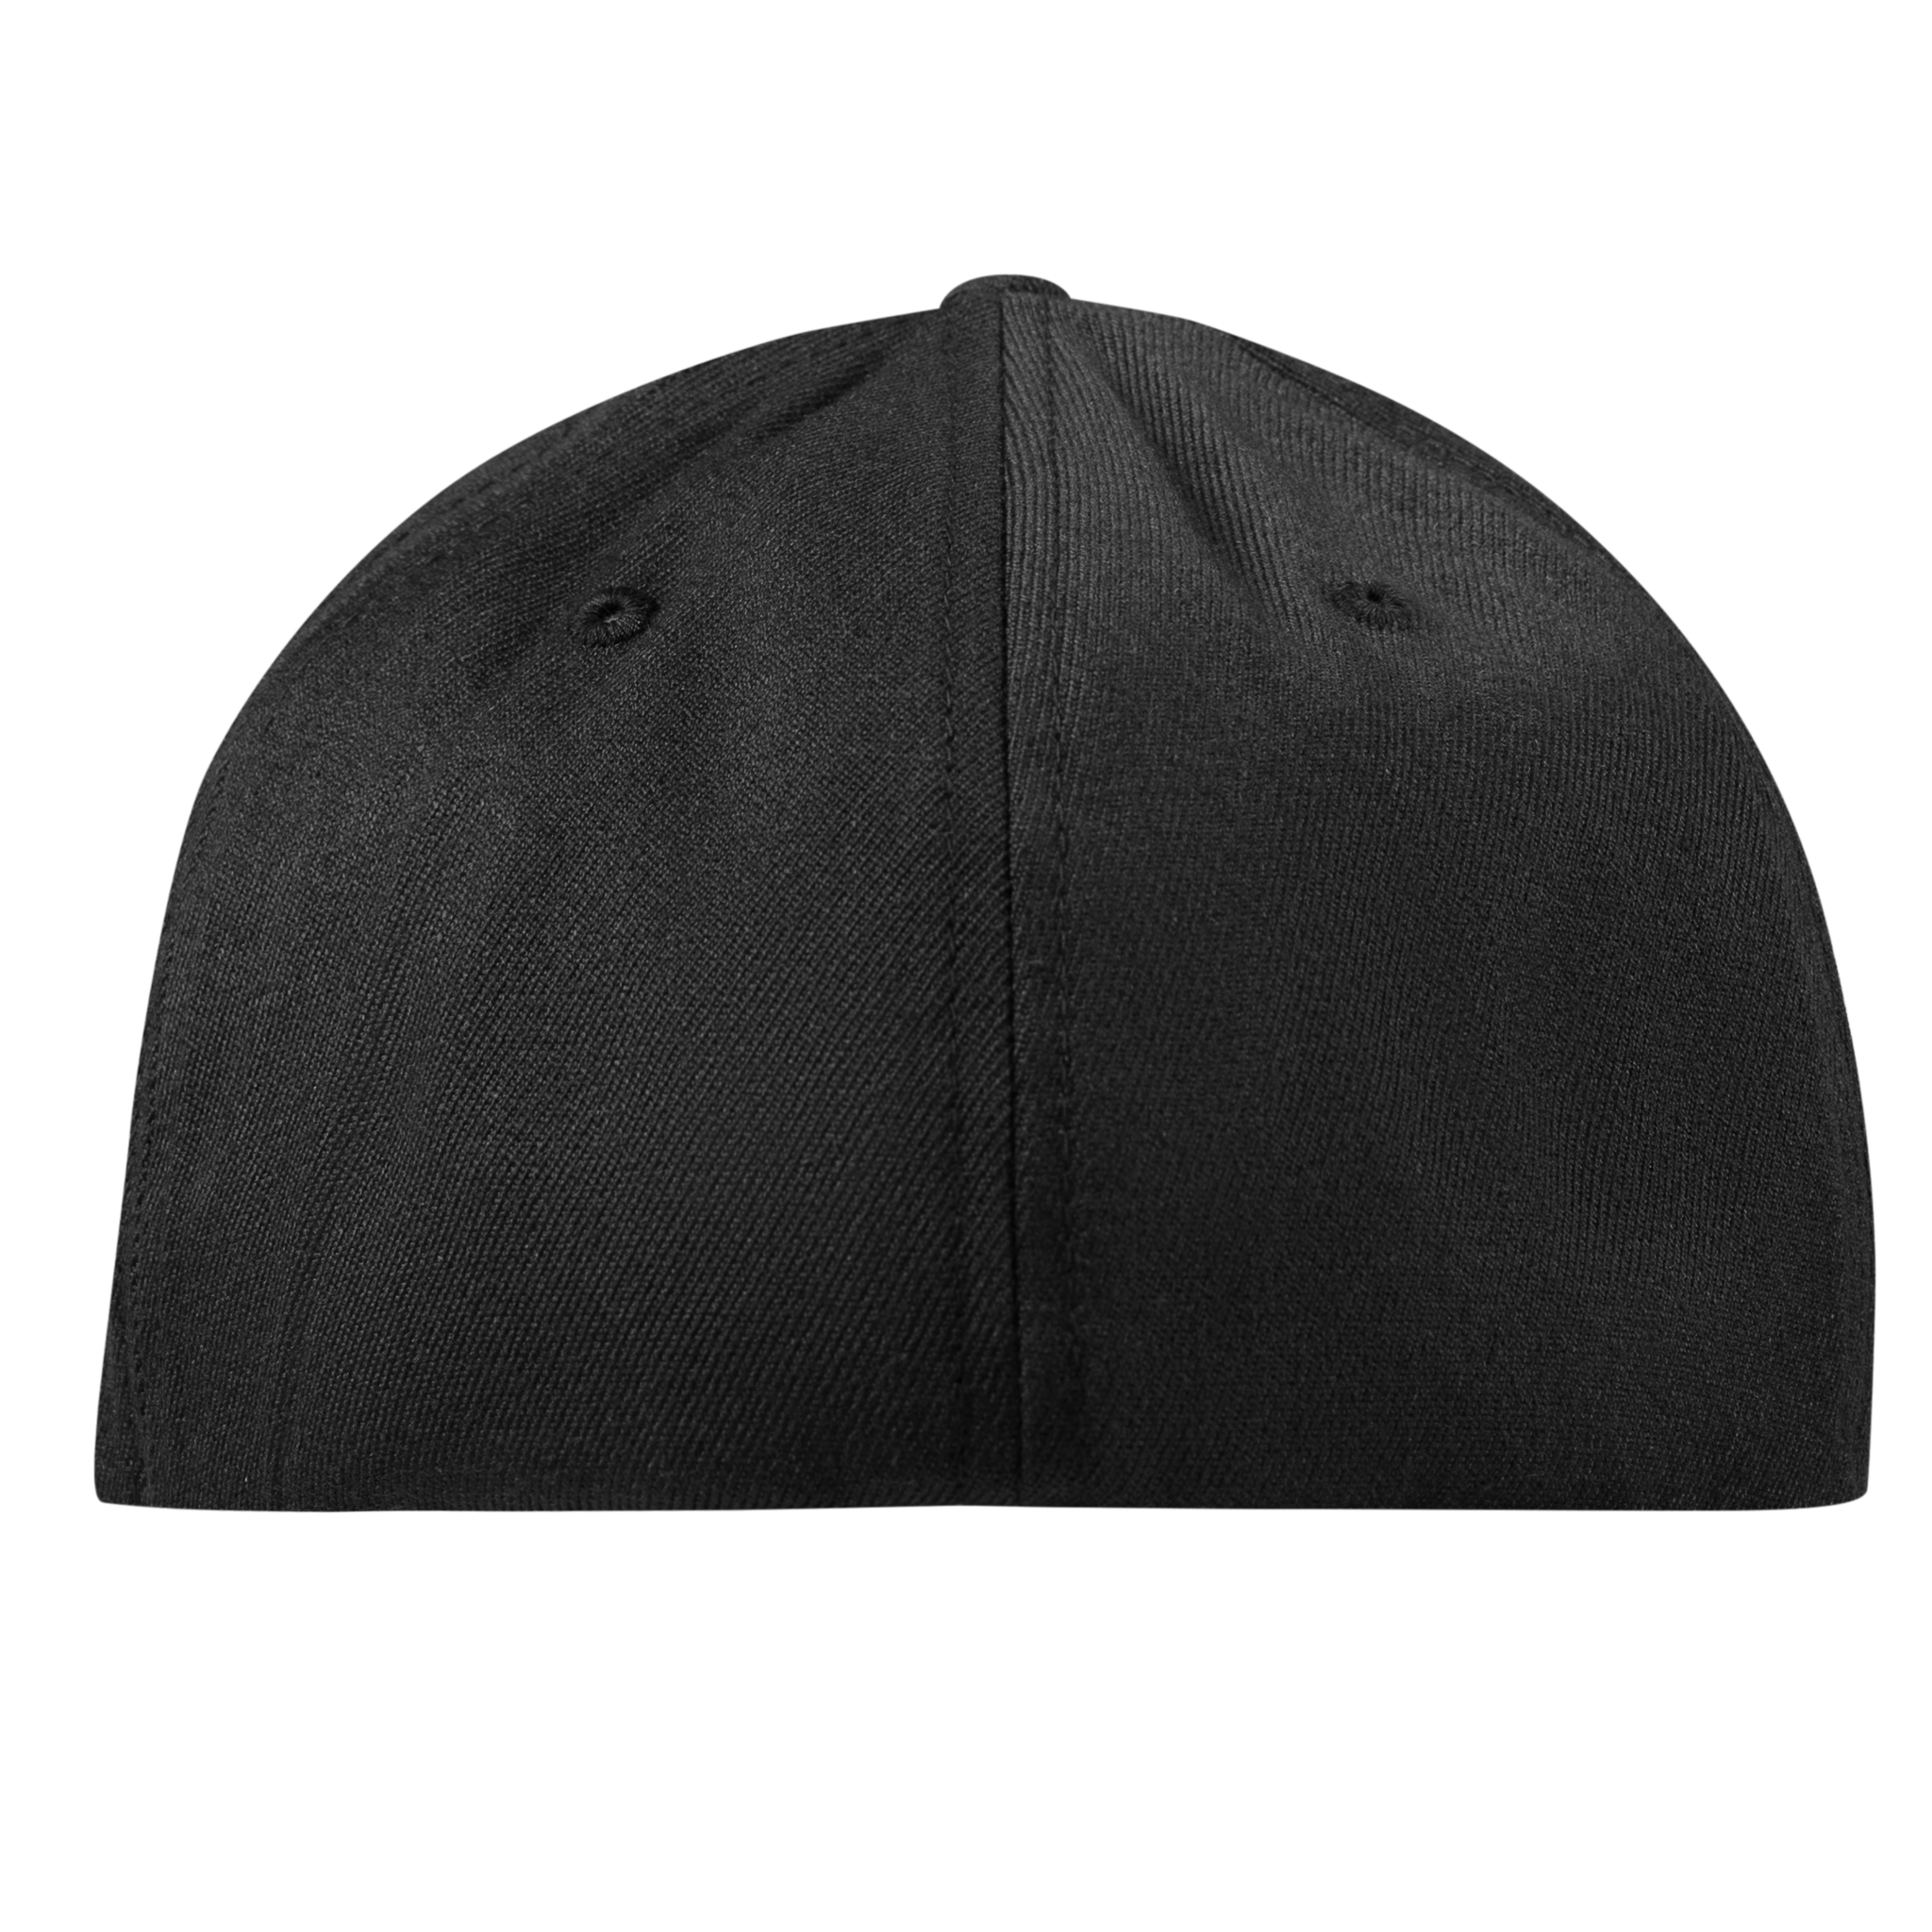 We The People Skull PVC Flexfit Fitted Back Black